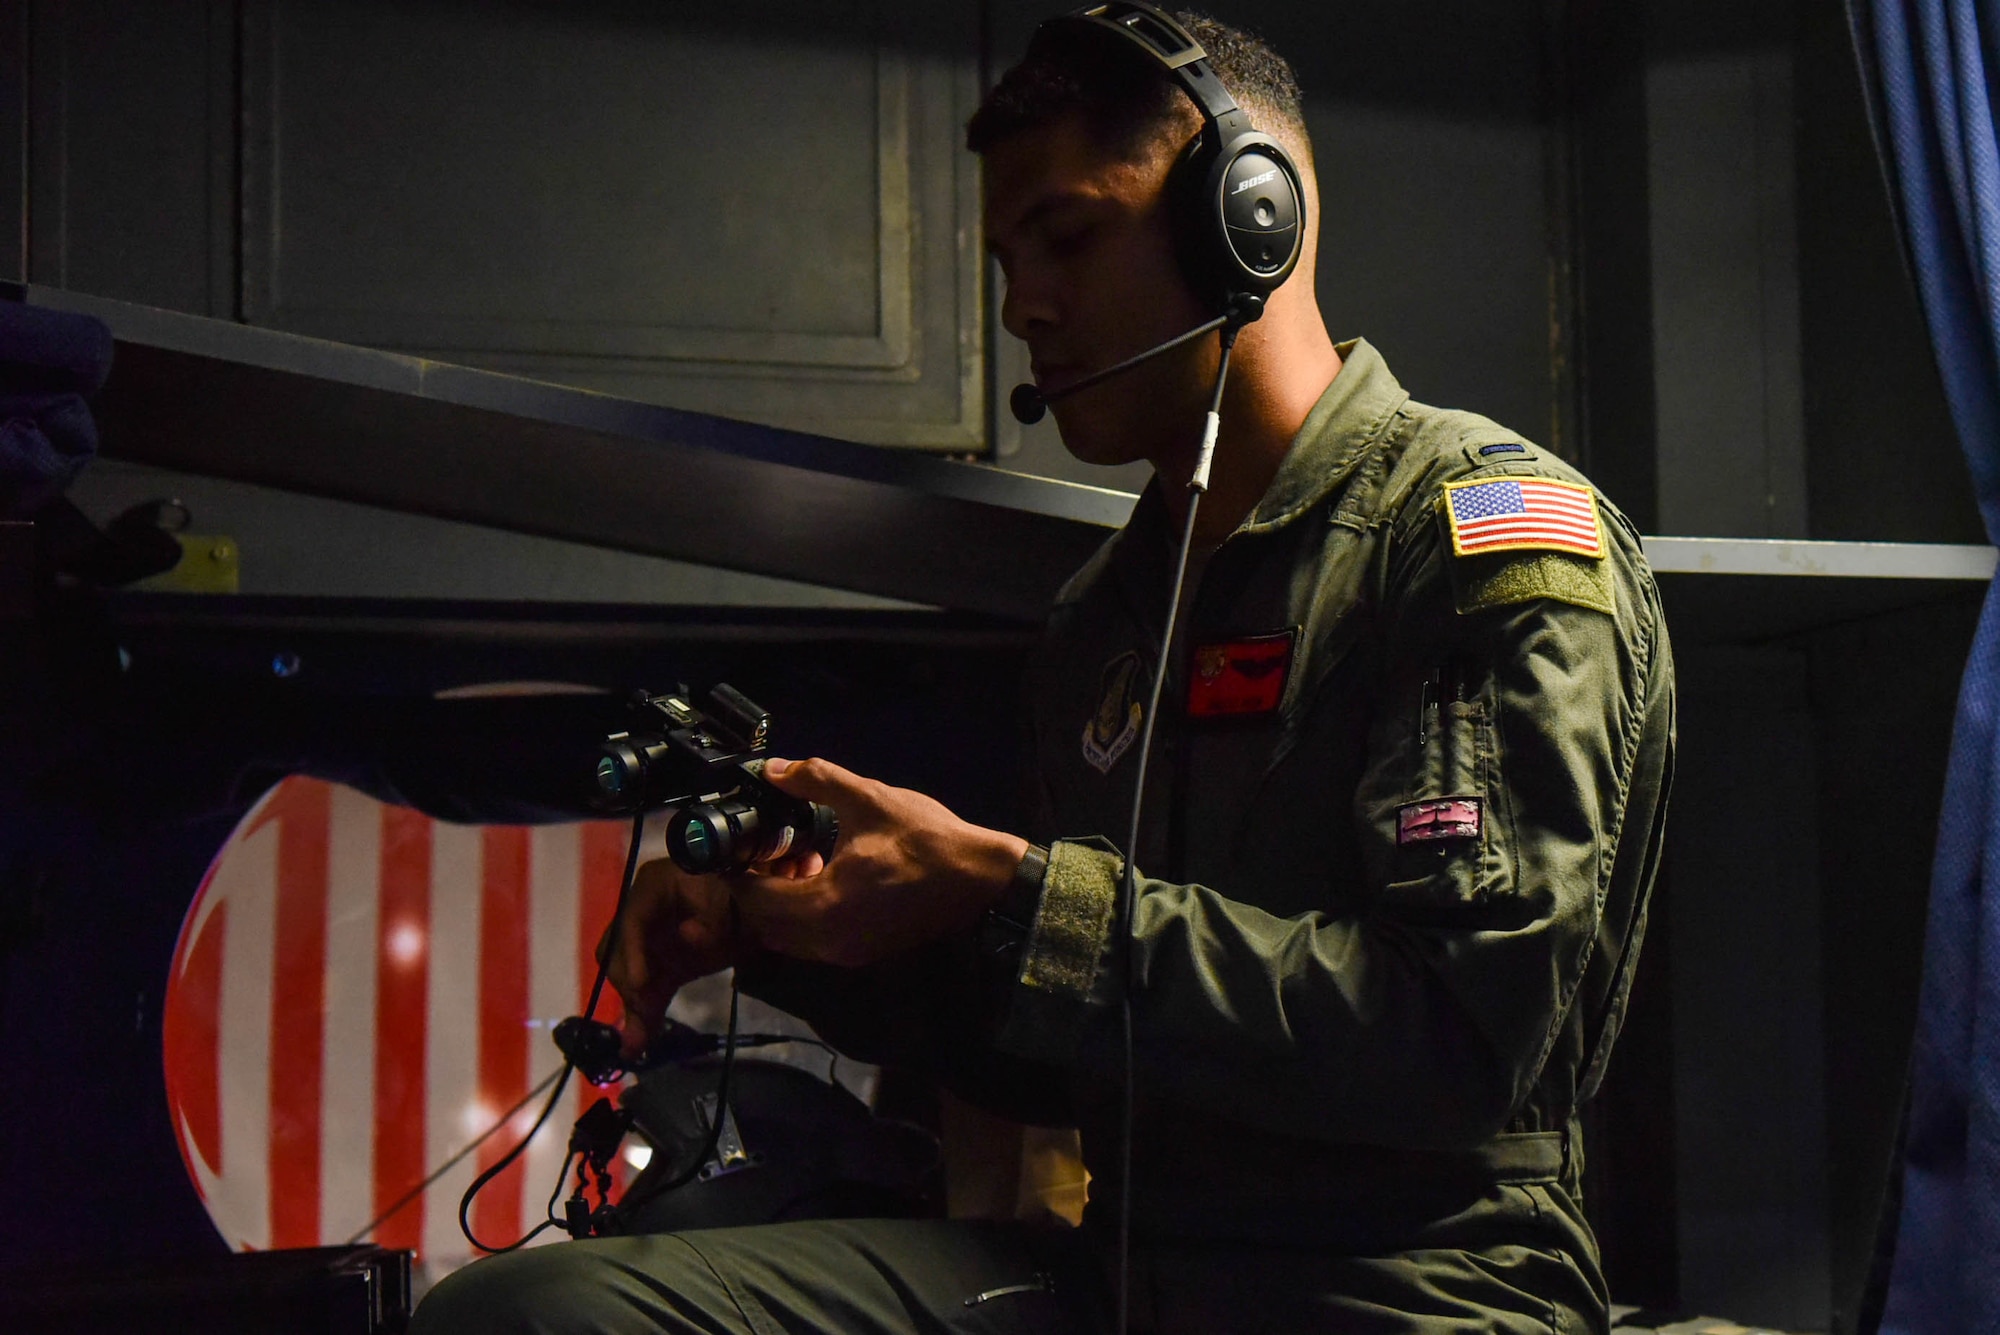 U.S. Air Force 1st Lt. Marcus Pryor, 535th Airlift Squadron pilot, prepares night vision goggles for nighttime flying during Exercise Global Dexterity at Joint Base Pearl Harbor-Hickam, Hawaii, May 5, 2022. The Royal Australian Air Force joined the 535th Airlift Squadron for flare demonstrations and nighttime training aerial maneuvers around the Hawaiian Islands to better increase each crews' operational resiliency. (U.S. Air Force photo by Airman 1st Class Makensie Cooper)